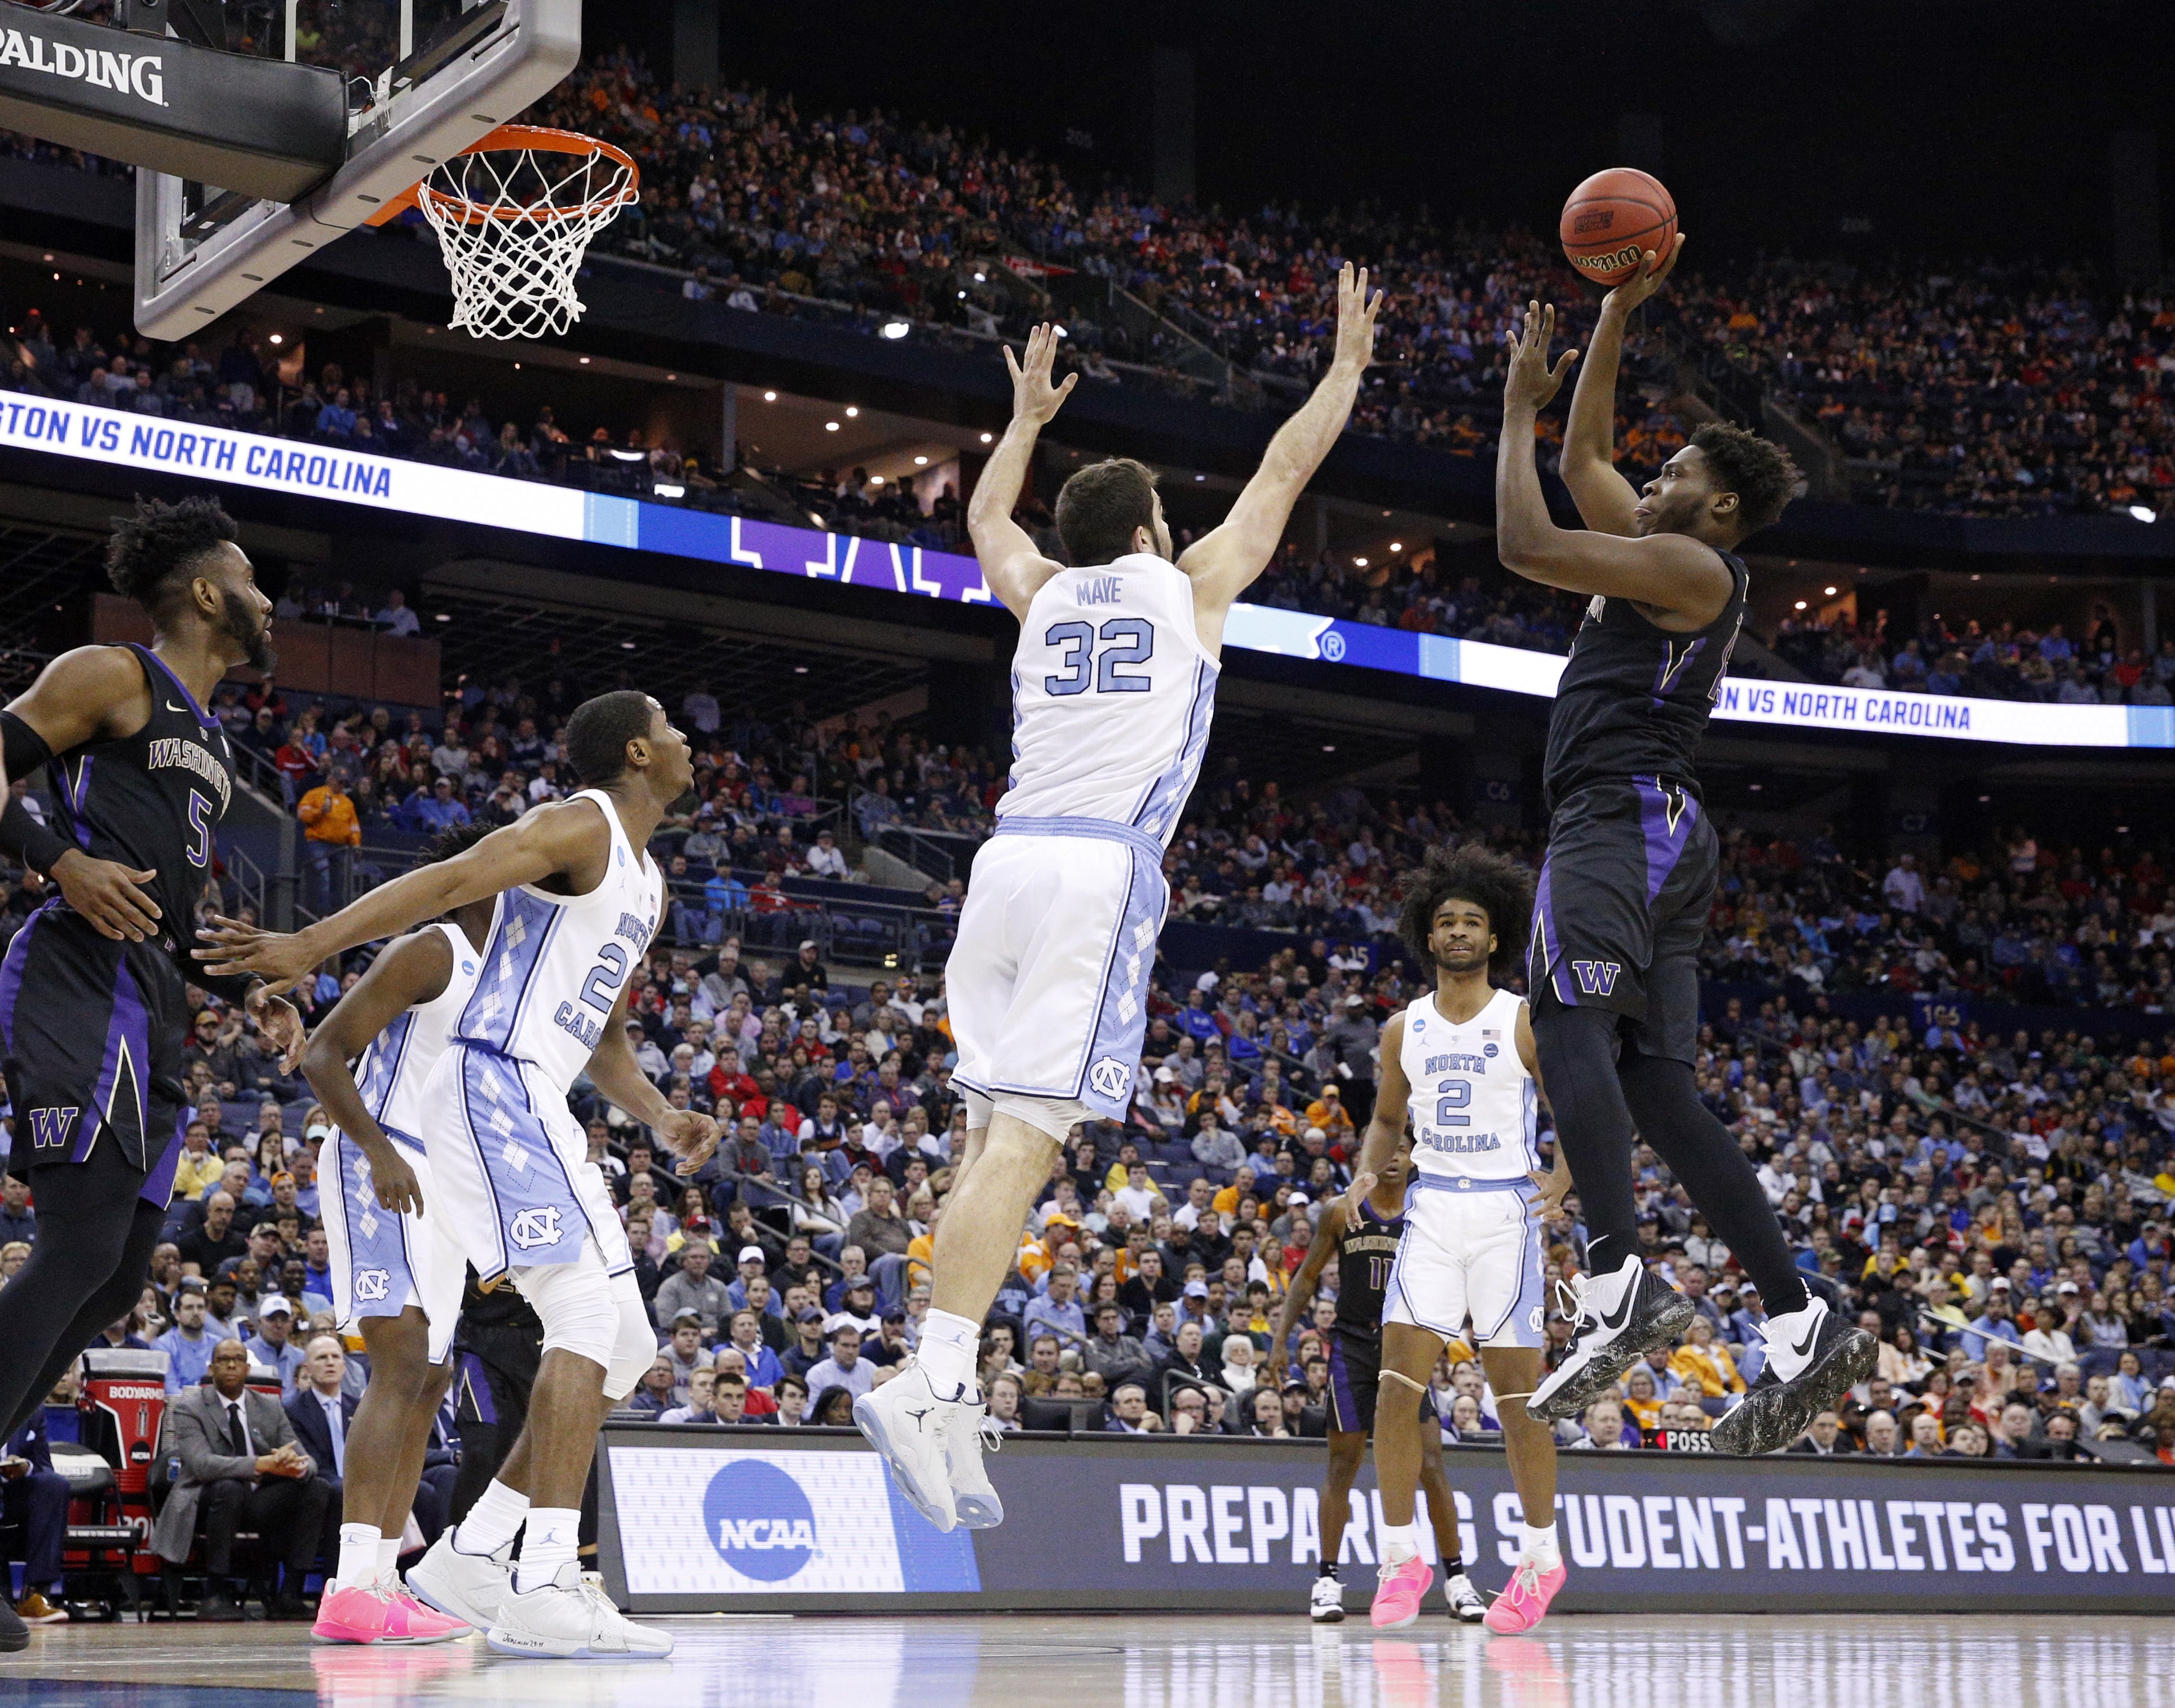 Washington's Noah Dickerson, right, shoots over North Carolina's Luke Maye in the first half during a second round men's college basketball game in the NCAA Tournament in Columbus, Ohio, Sunday, March 24, 2019.